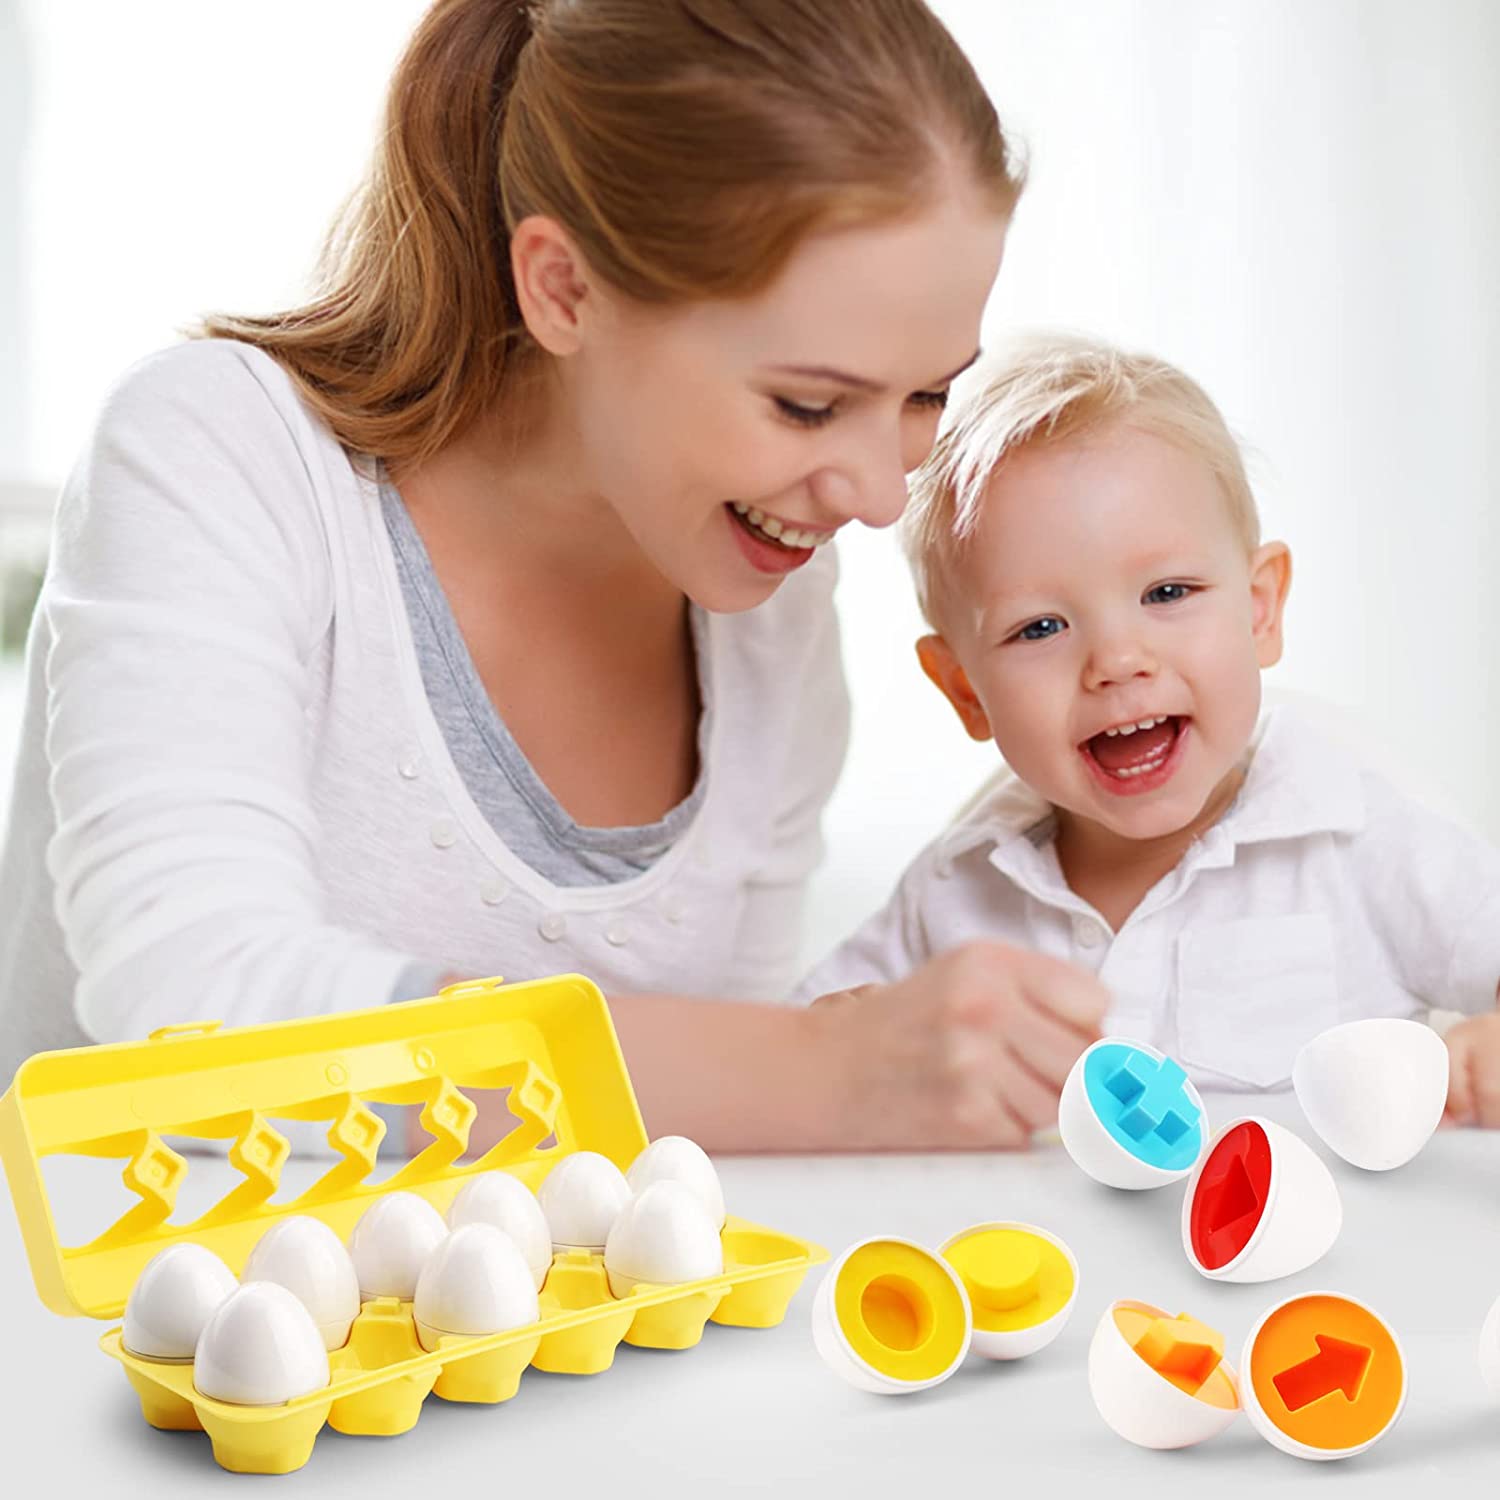 Baby Montessori Toys Egg Puzzle Games Kids Toys Color Shape Matching Eggs Educational Toys for Children 0-3 Years Old Boys Girls 